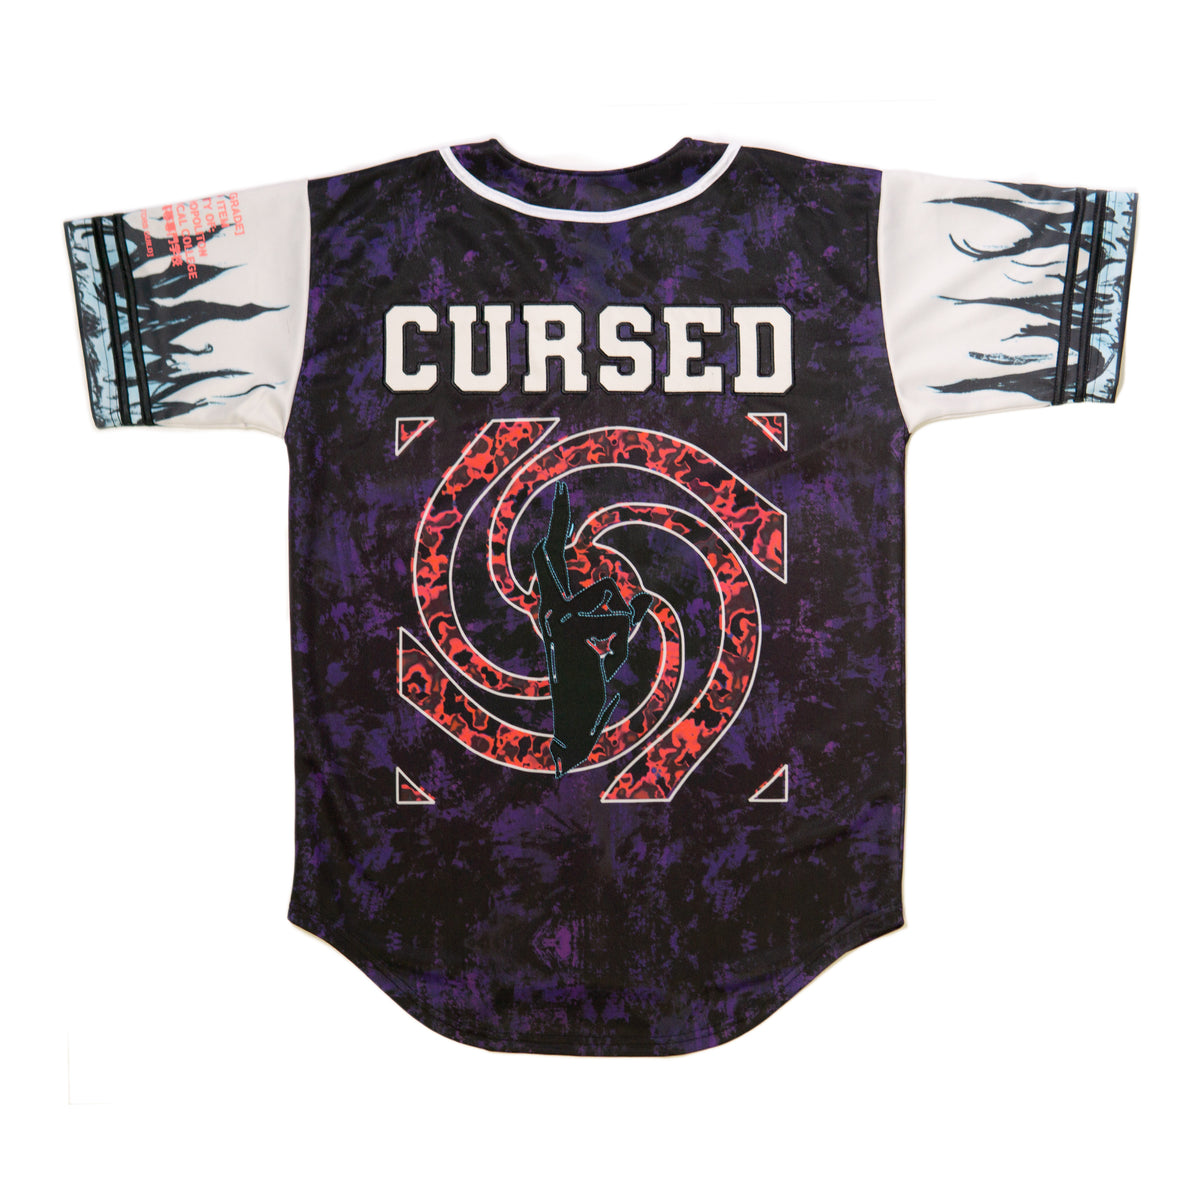 Need a Cursed Jersey?